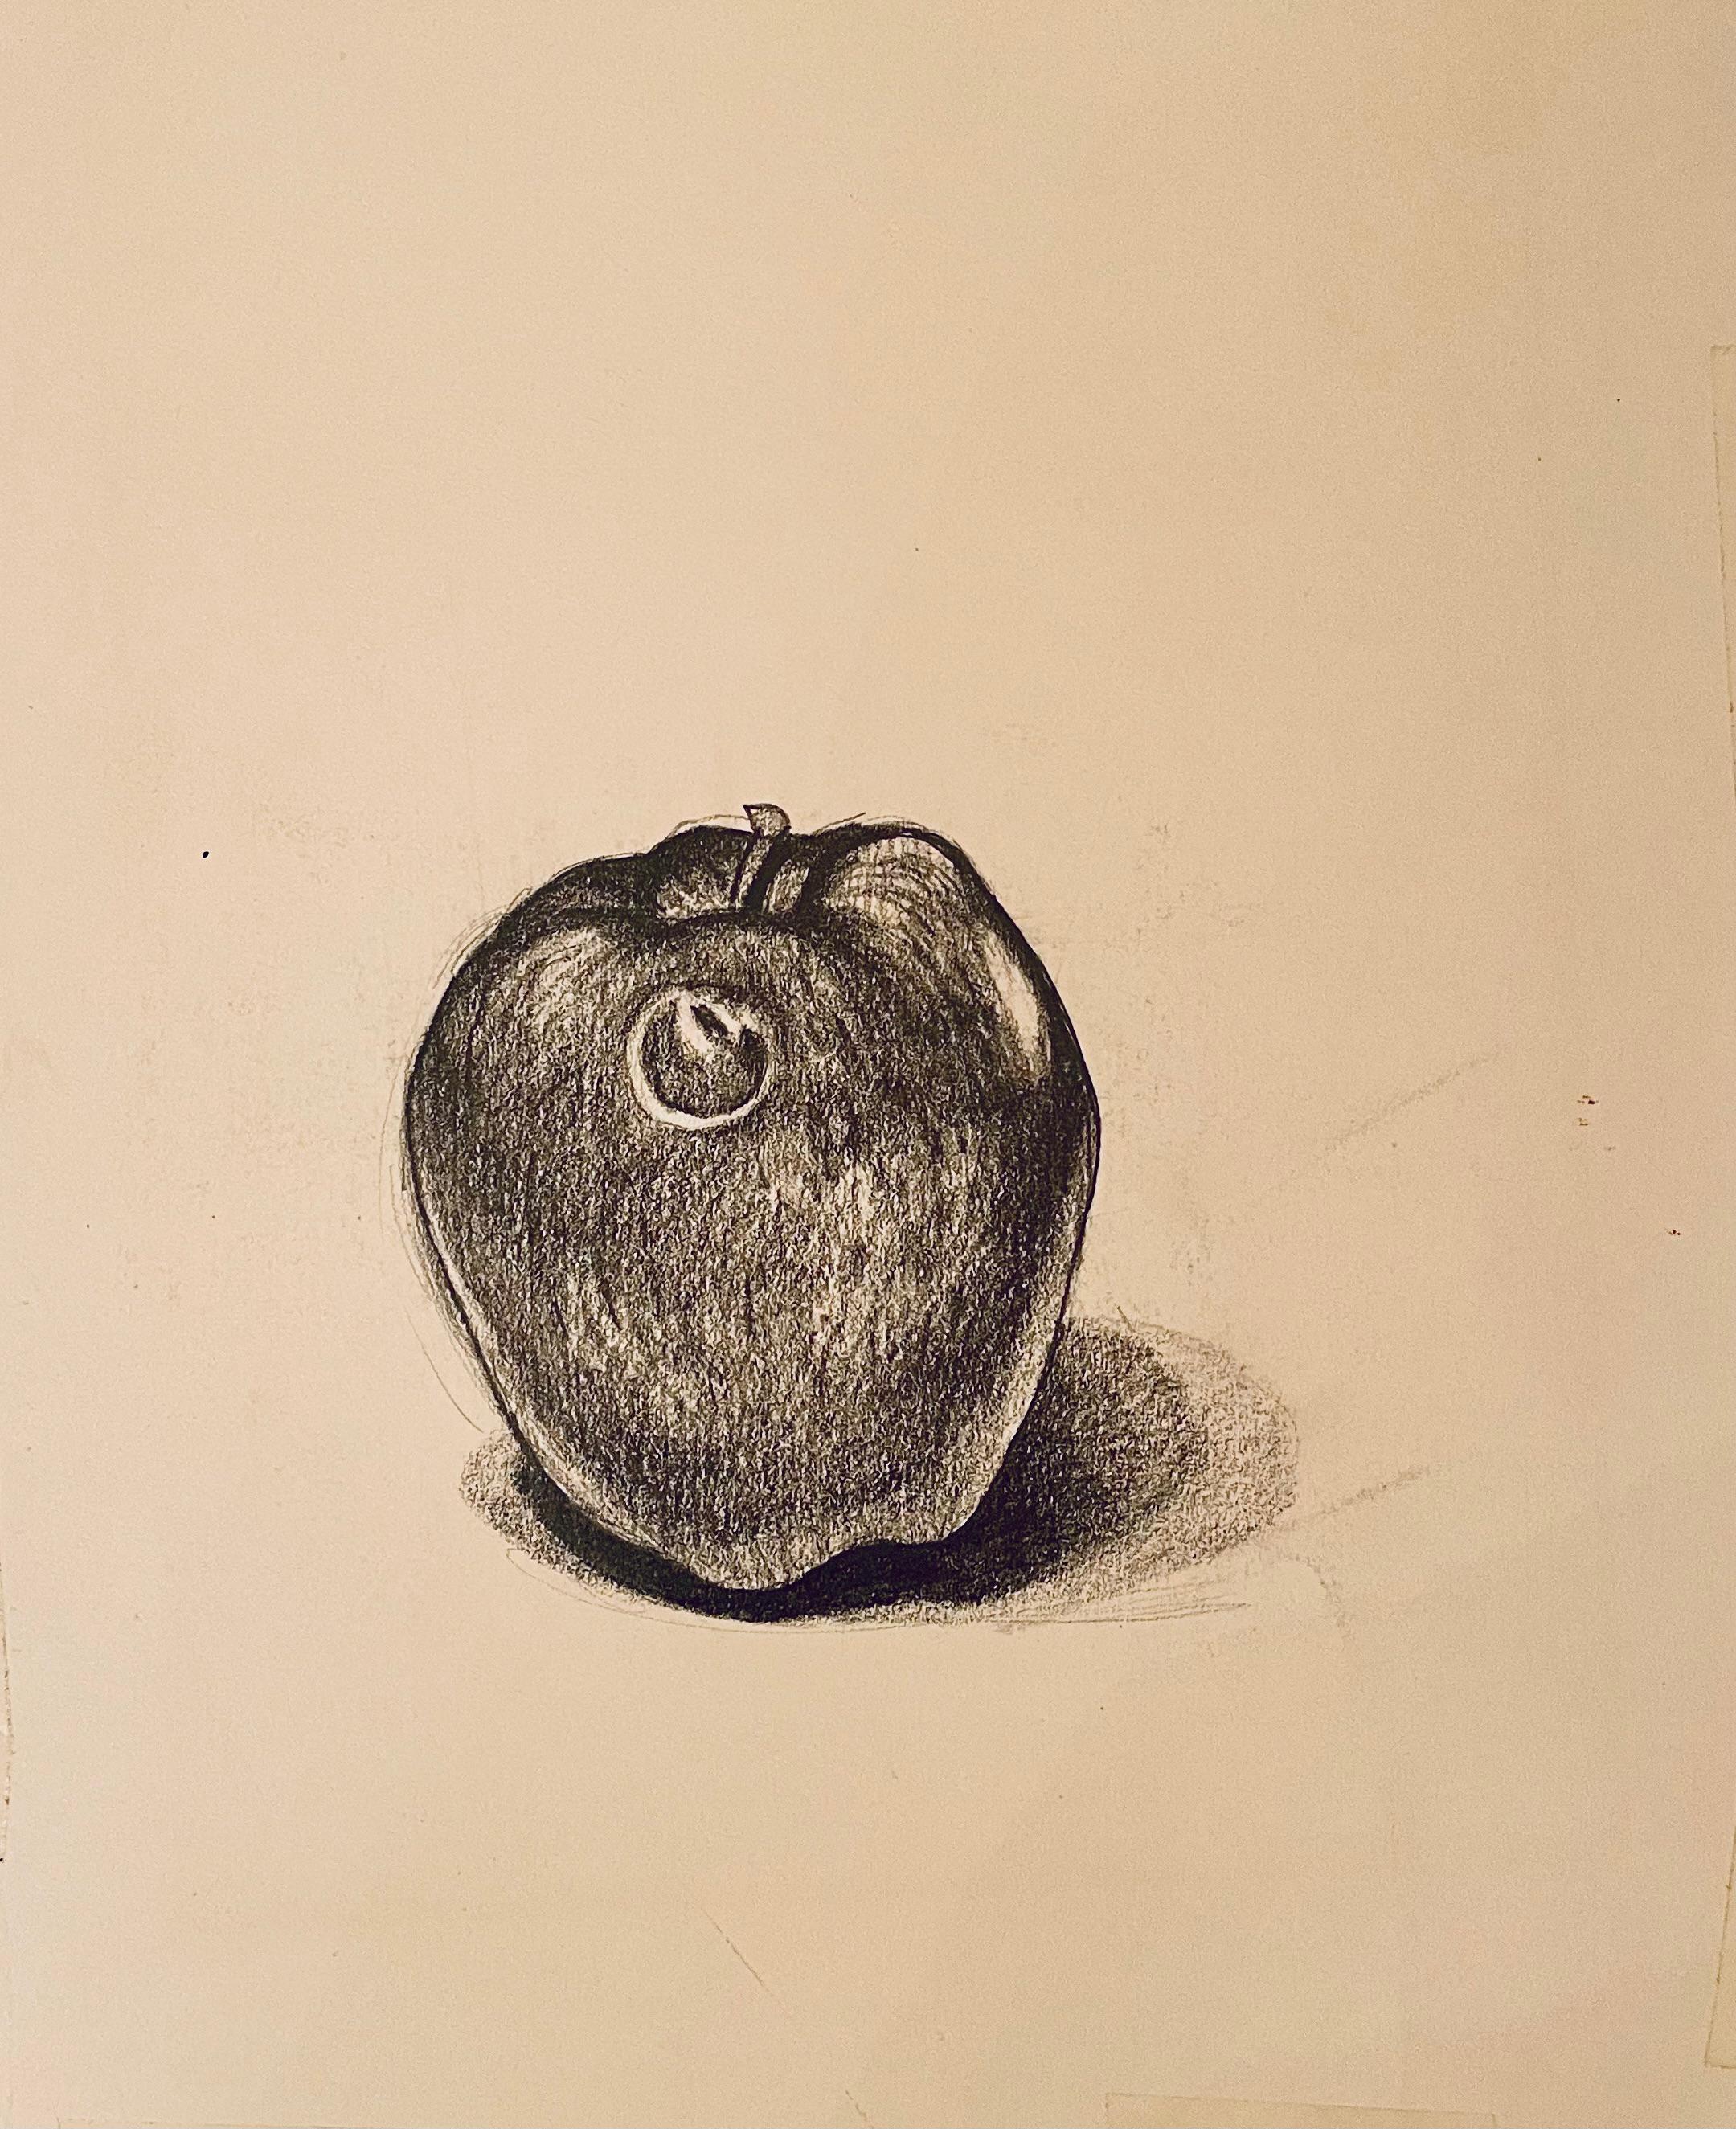 Original drawing on archival paper, circa 1985.  Paper Size: 12 x 10 inches. Provenance: Estate of Ian Hornak, East Hampton, New York.

IAN HORNAK (January 9, 1944 – December 9, 2002) was an American draughtsman, painter and printmaker. Described by